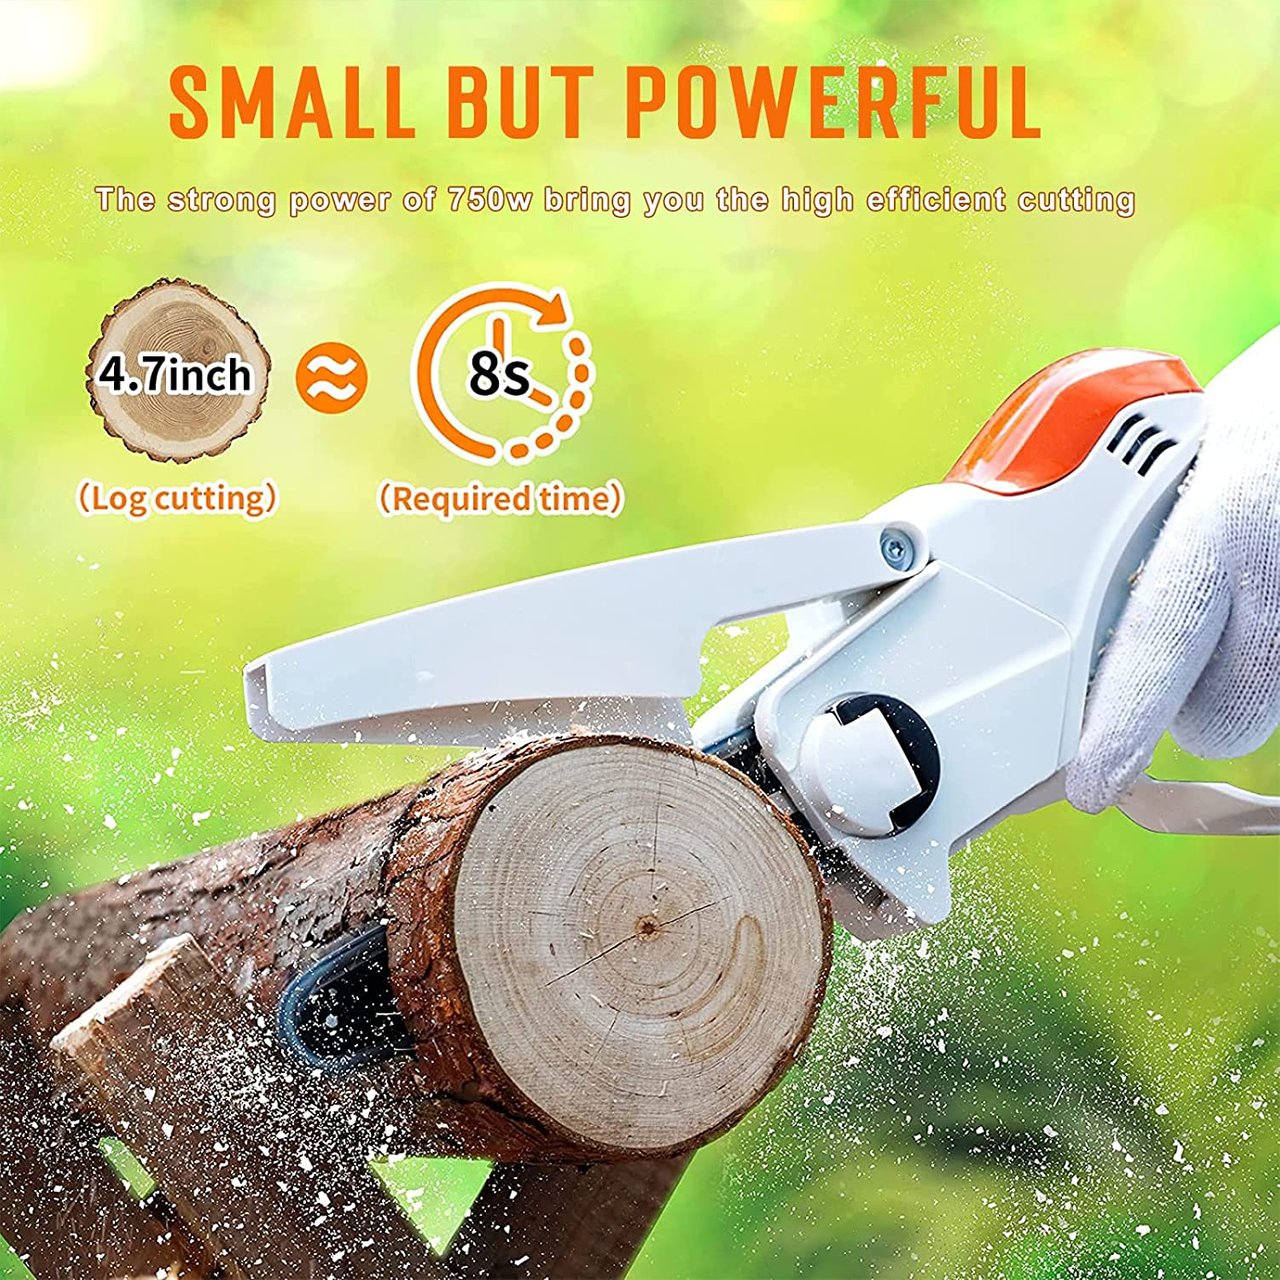 2 Peektook Mini Chainsaw Cordless Electric Chainsaw, Upgrated 6 Inch Chain Saw with 2 Battery and 2 Chains, Portable Scie à Chaîne à Batterie with Safety Lock and Strong Power Perfect for Trim Shrubs/Branches/Logging in Gardens Yards and Camping